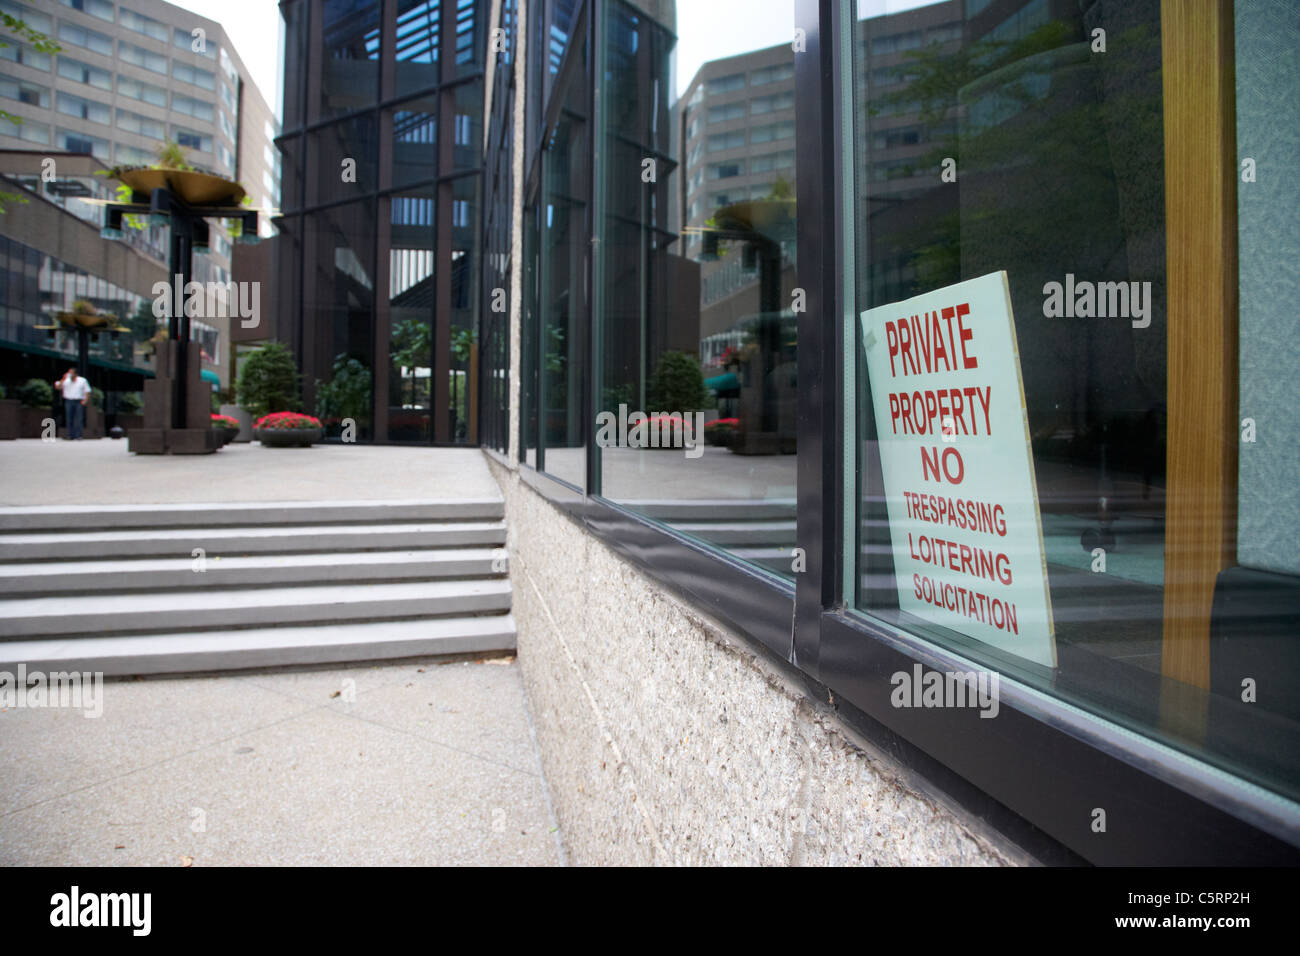 Private property no trespassing loitering solicitation sign in bank of america plaza in the financial district Nashville Tenness Stock Photo